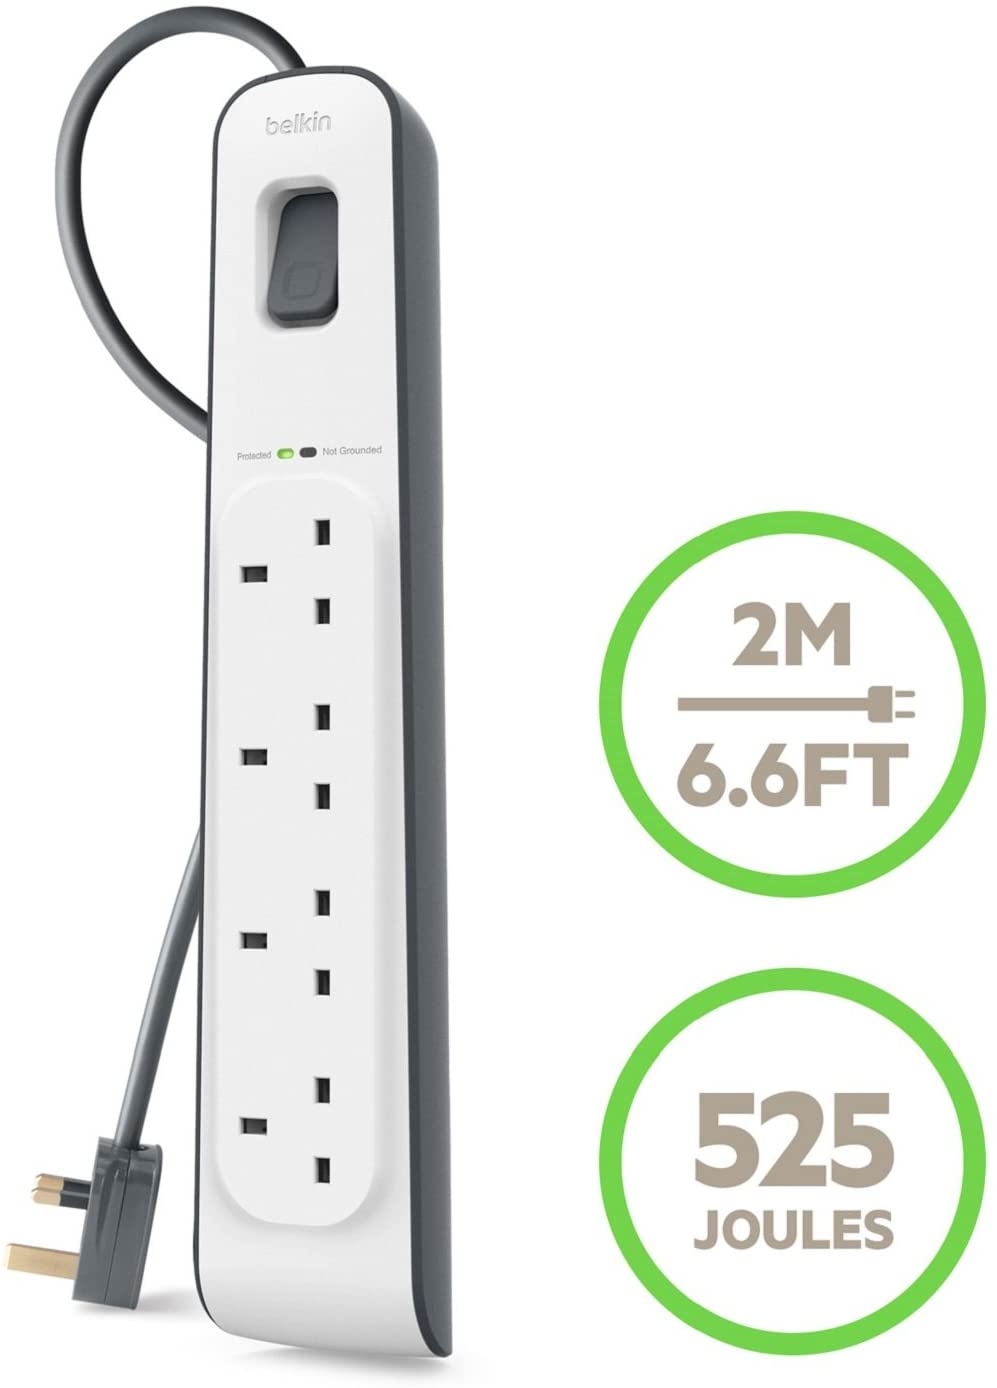 Belkin 4-Outlet Surge Protector with 2M Cord + 2 USB